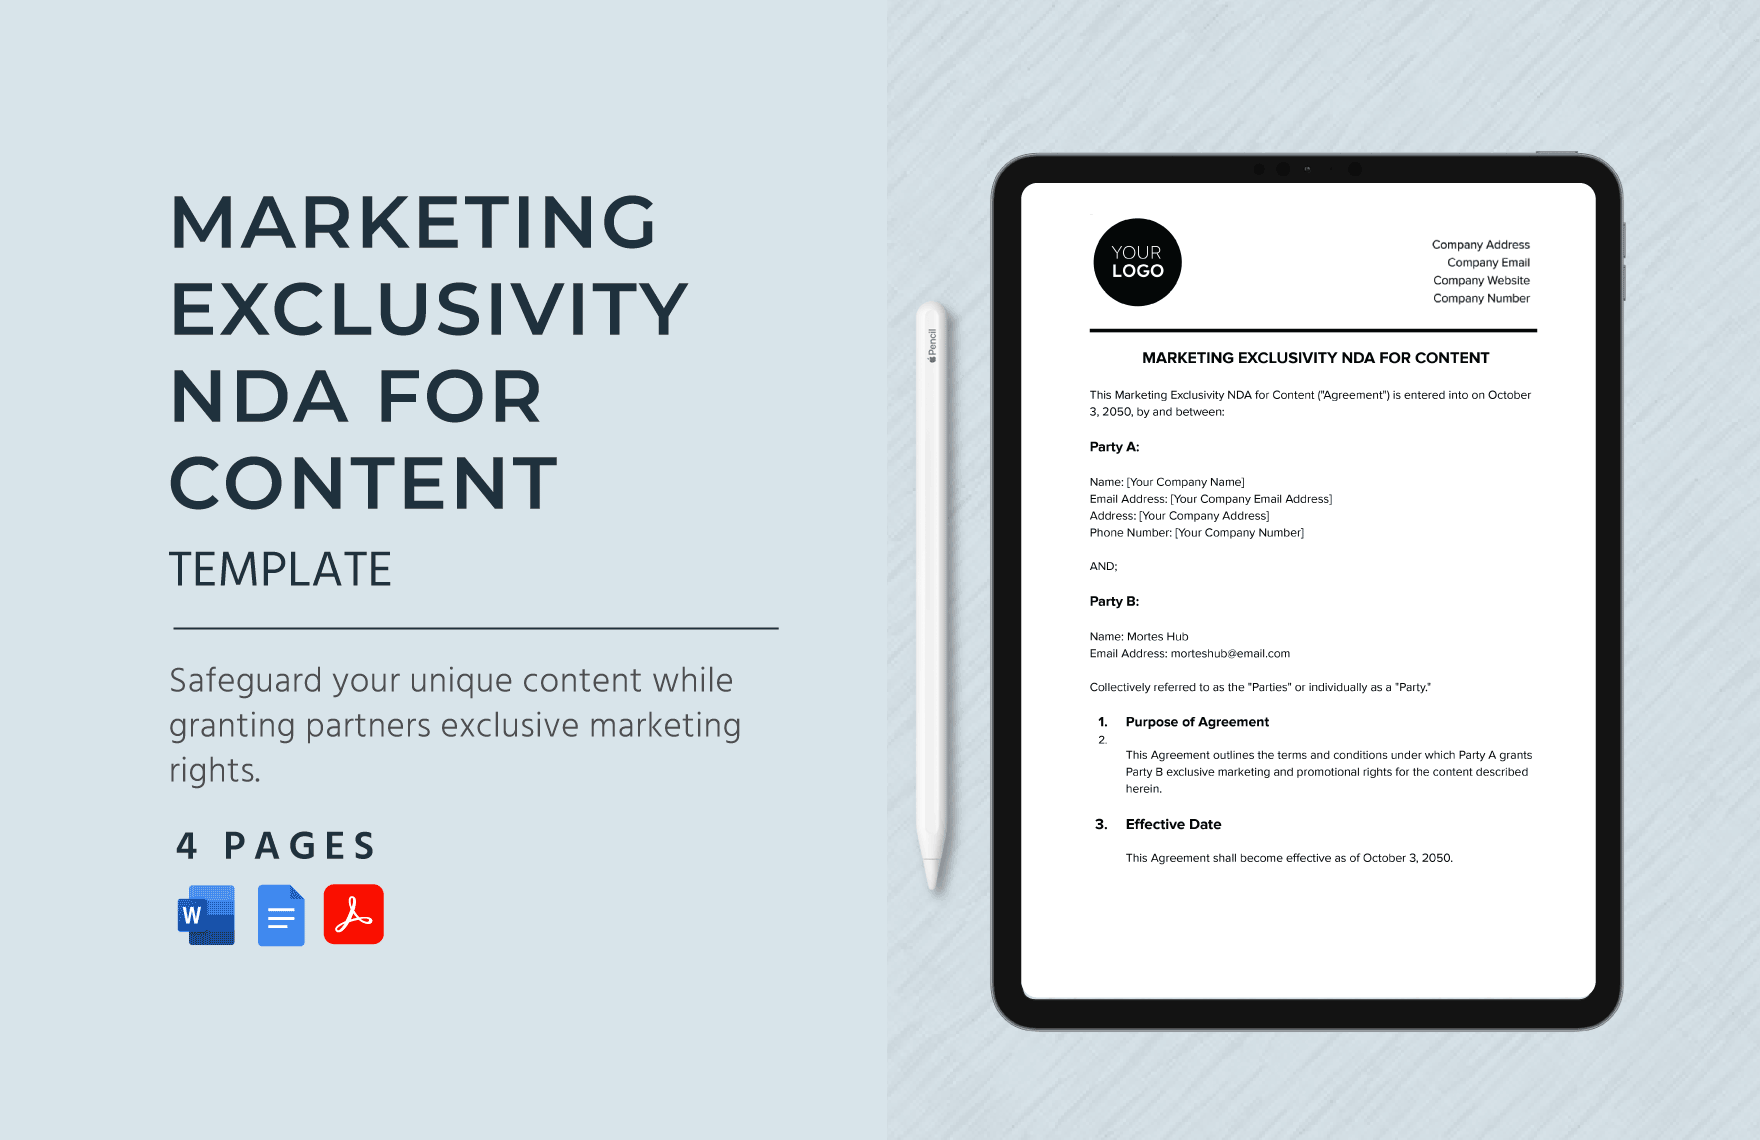 Marketing Exclusivity NDA for Content Template